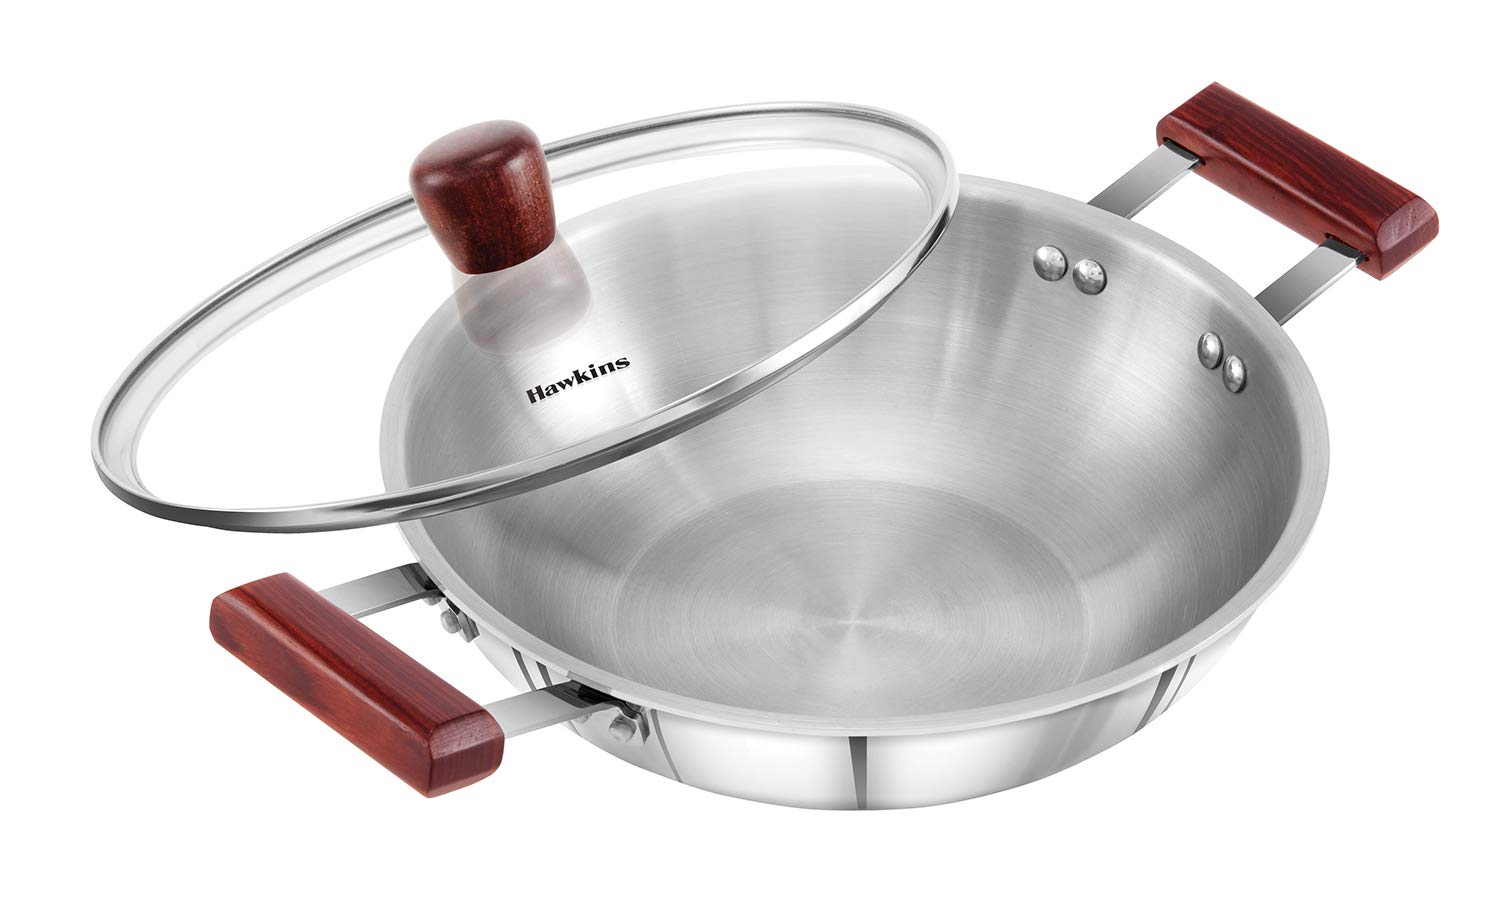 BERGNER Argent Triply Stainless Steel Tadka Pan with Stay Cool